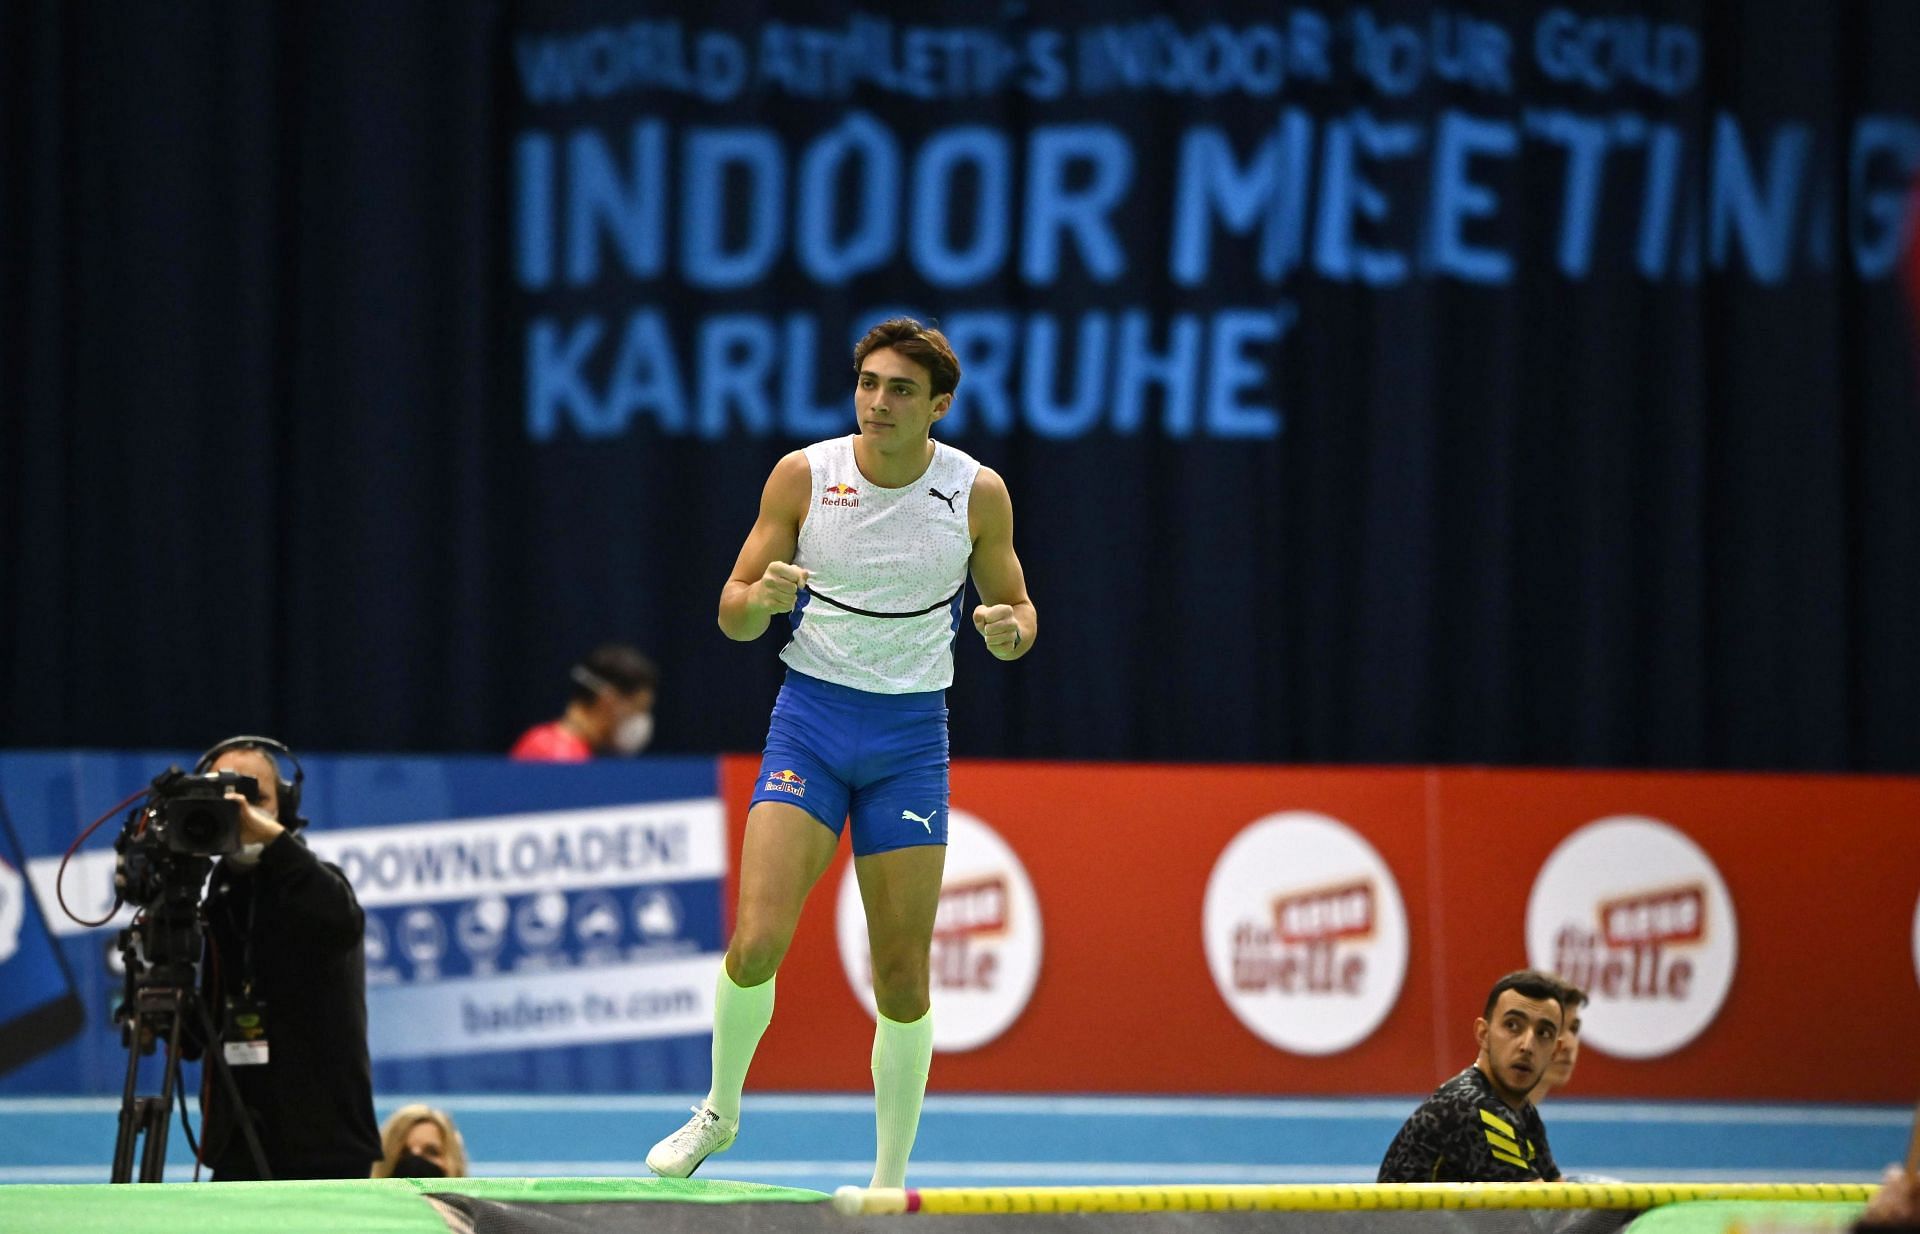 Armand Duplantis at the World Athletics Indoor Tour in Karlsruhe